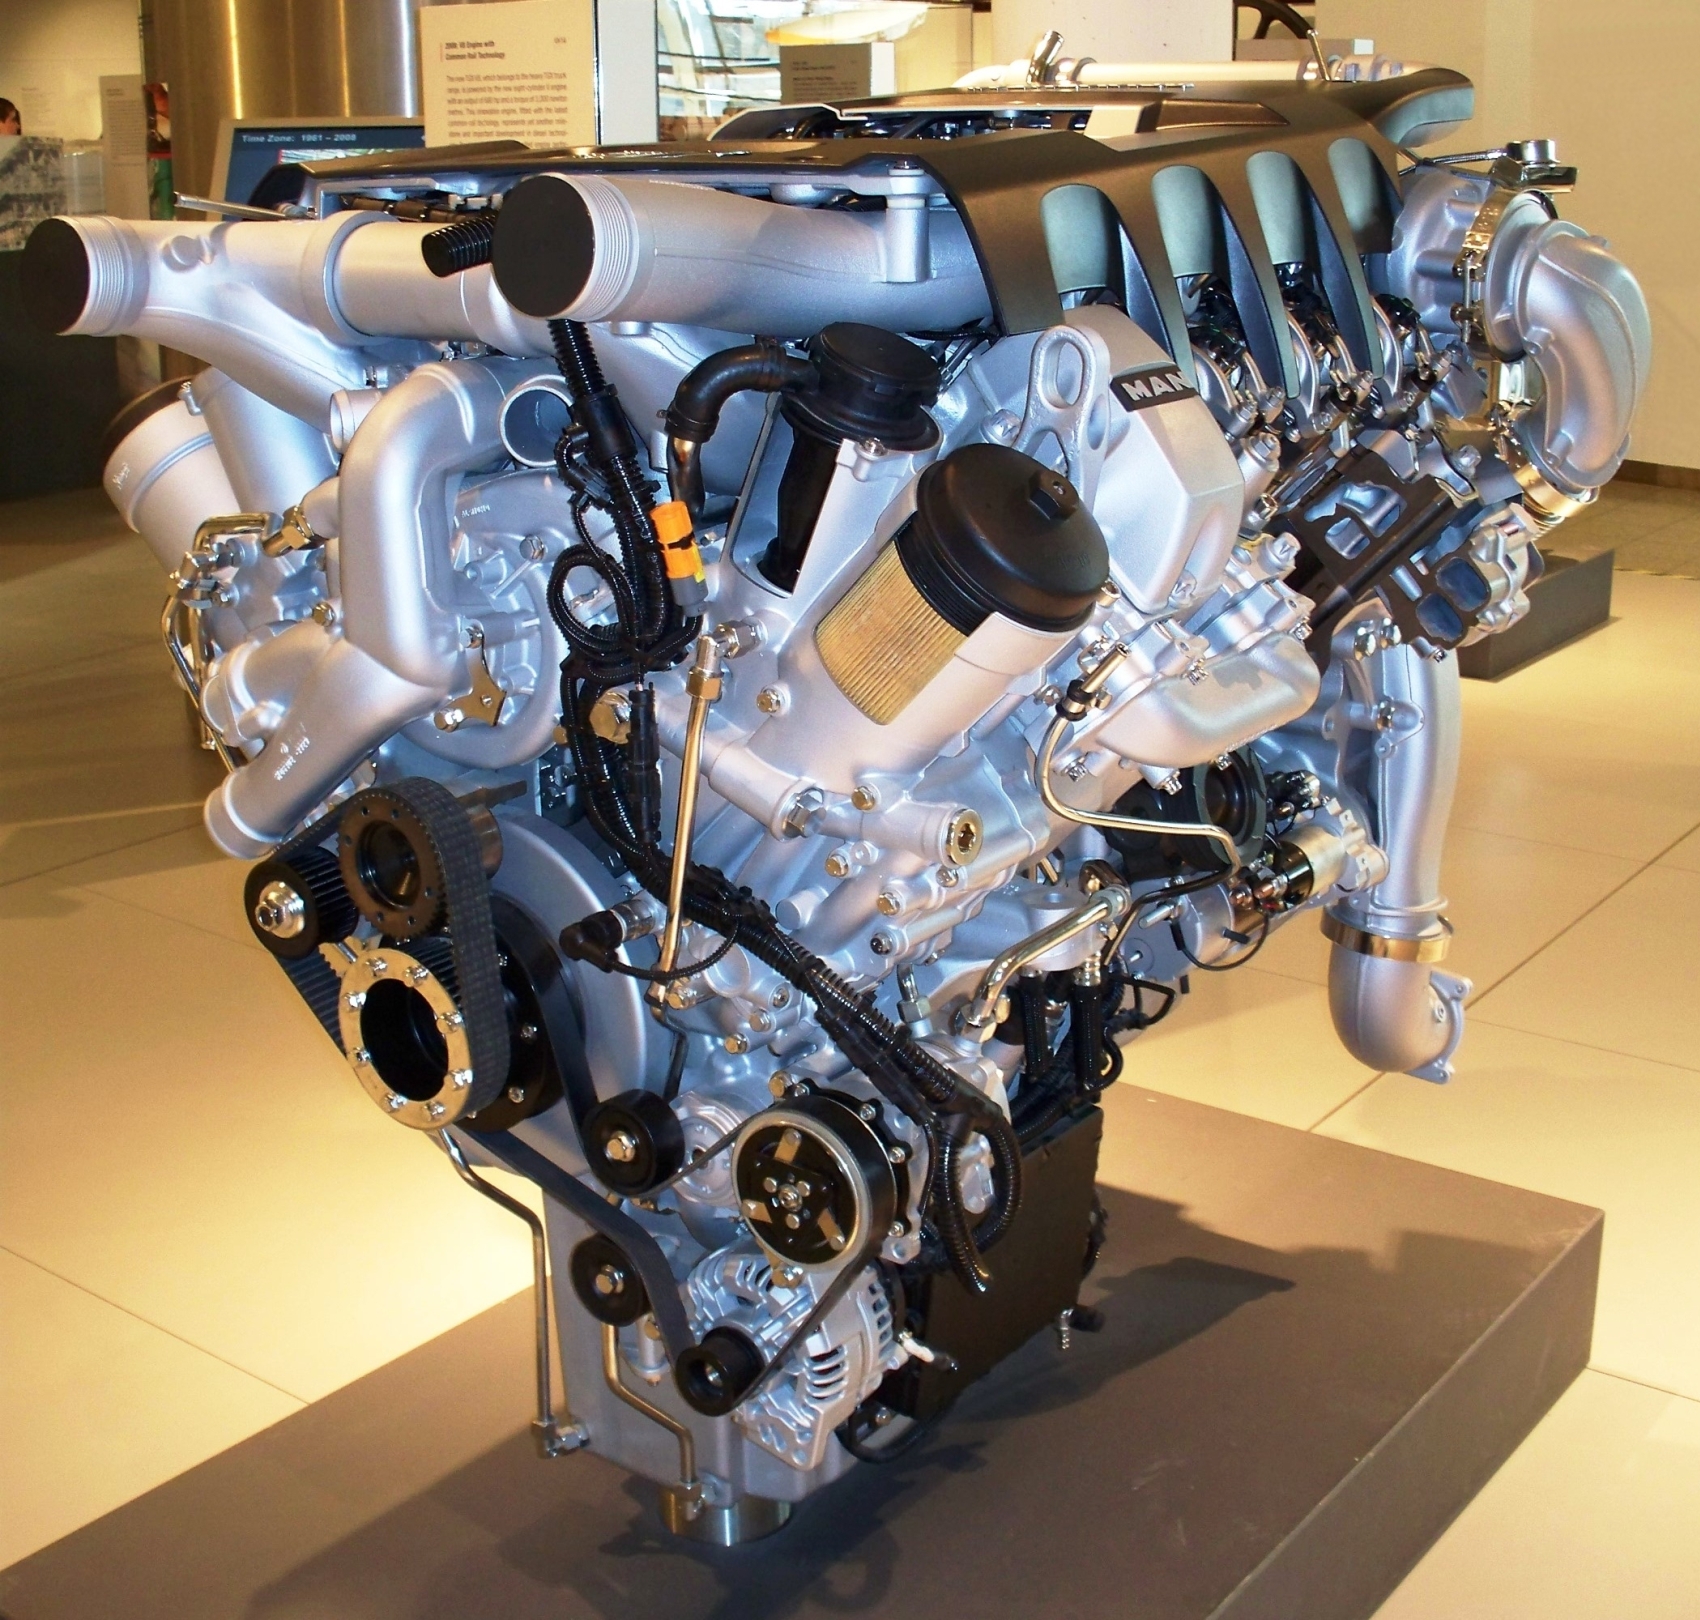  Here's  the Big Differences Between V6, V8, and V12 Engines